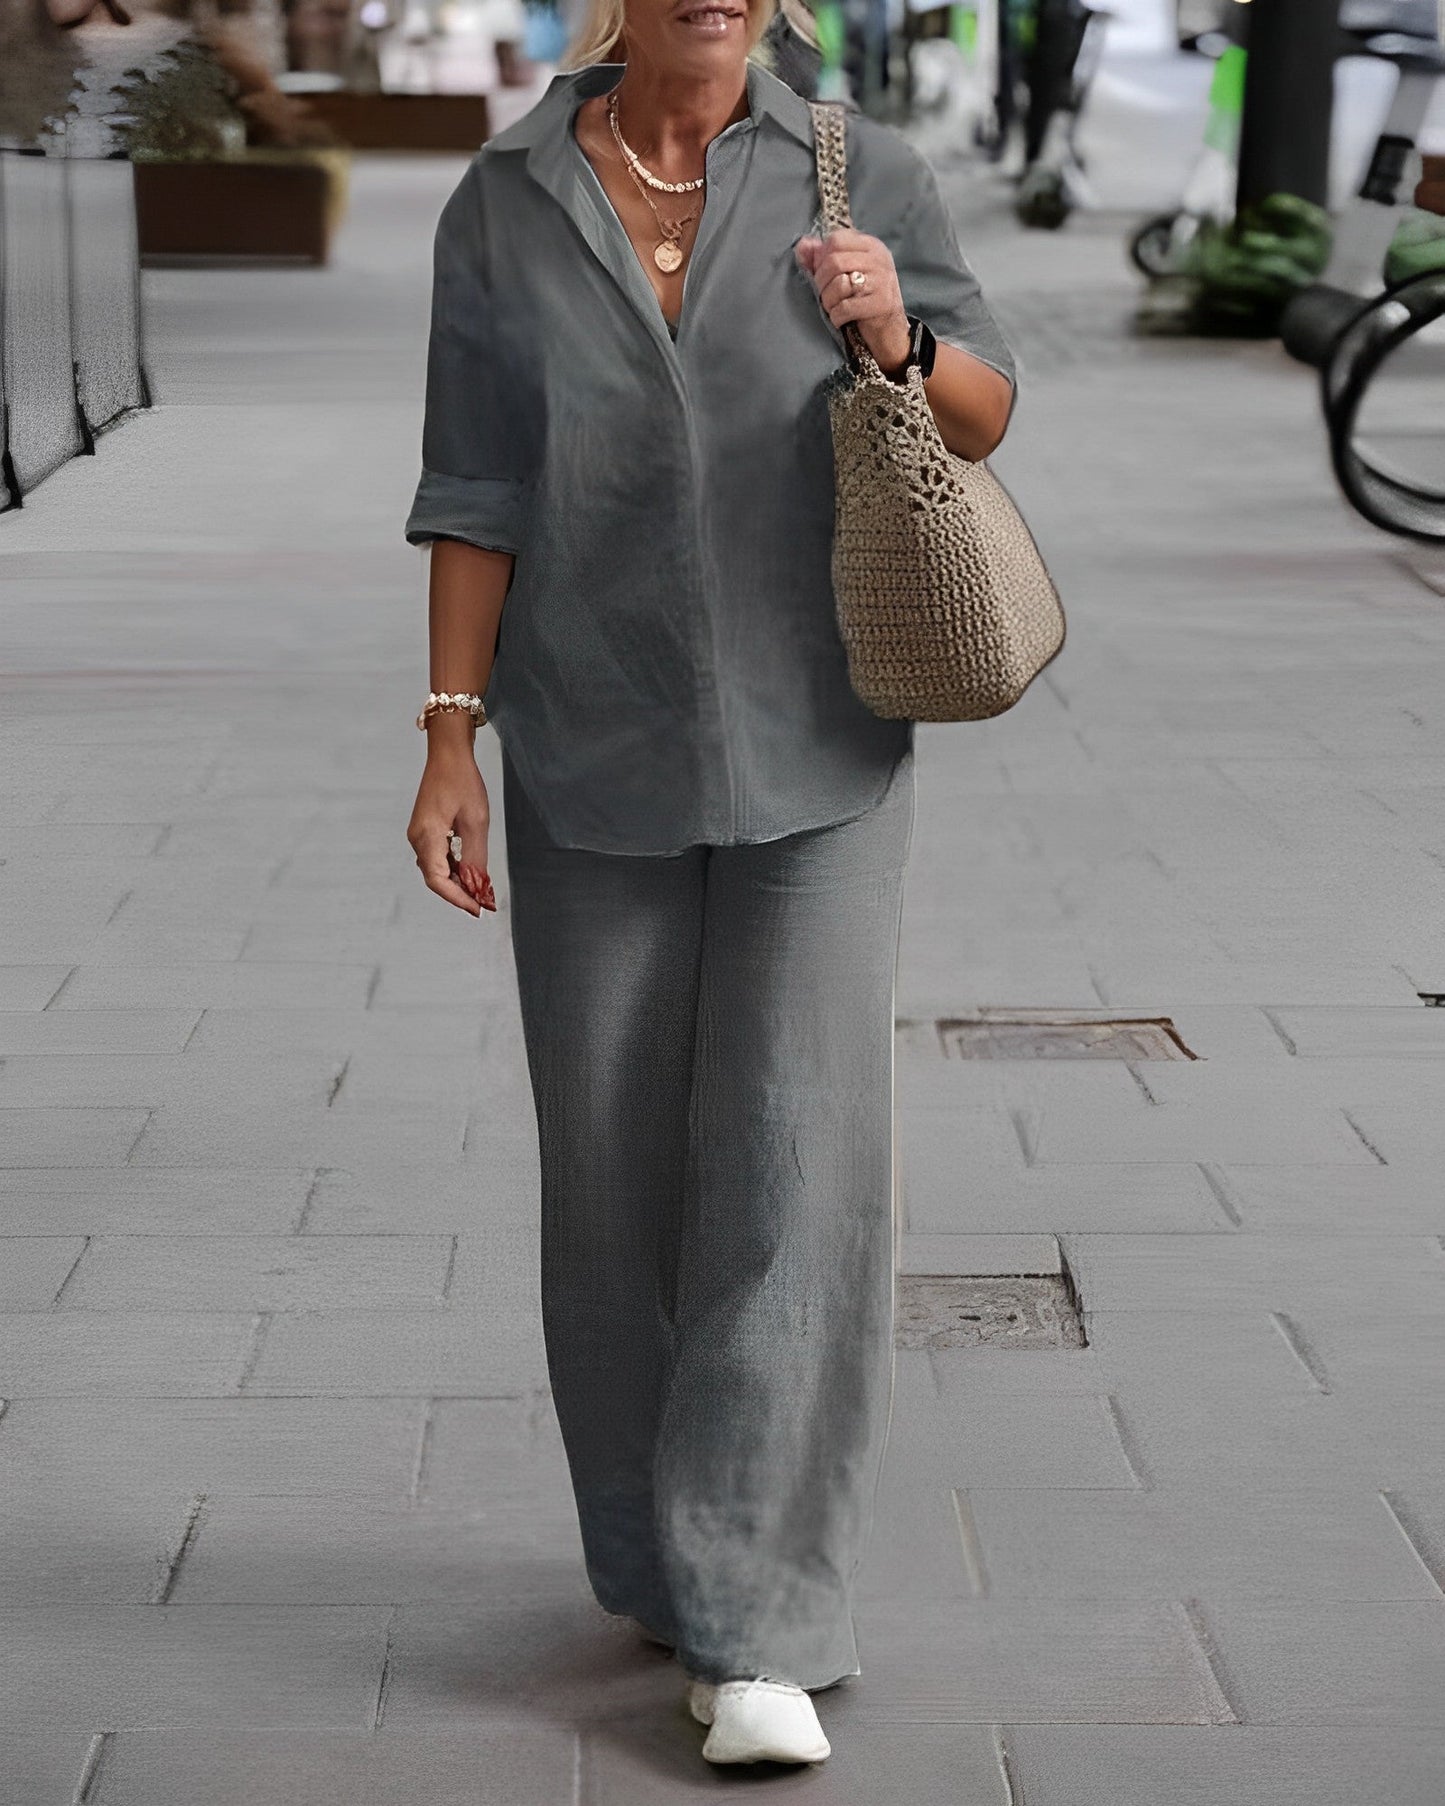 Long-sleeved two-piece leisure suit